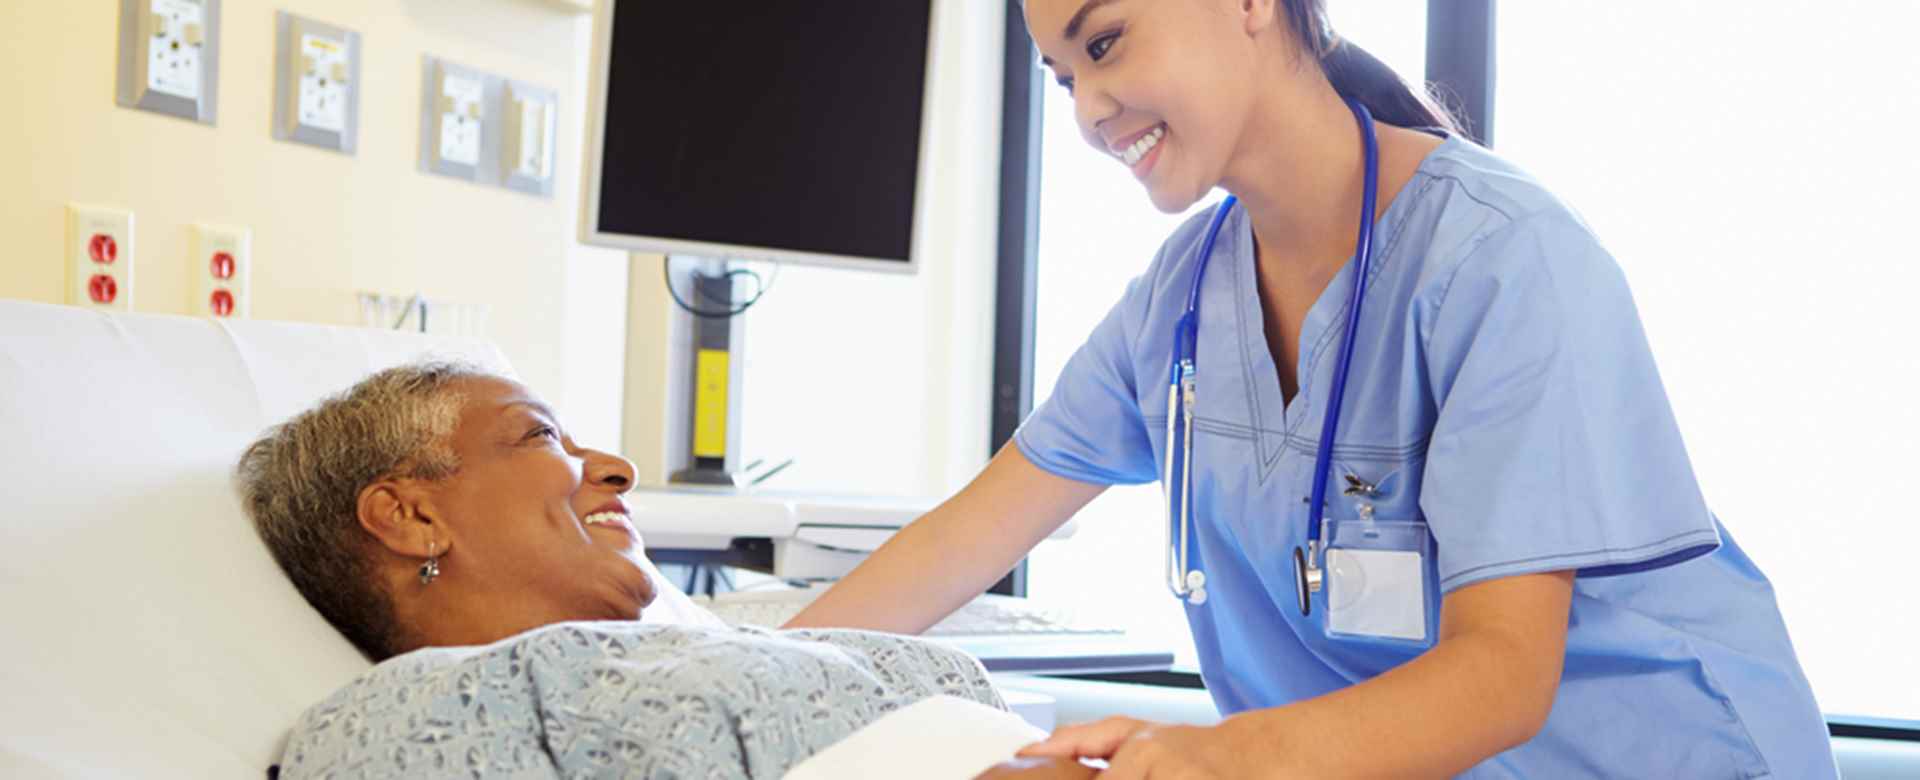 Mandated Nurse-to-Patient Staffing Ratios: Benefits at the Bedside and Beyond